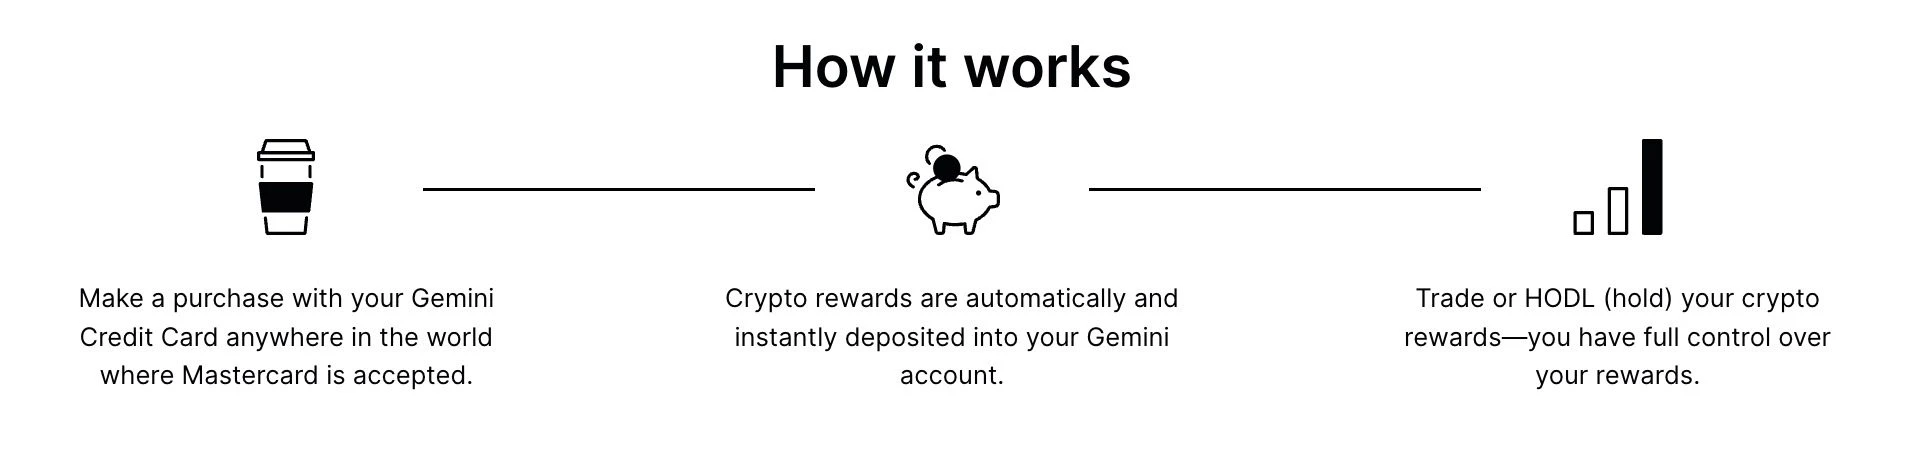 gemini review credit card how it works